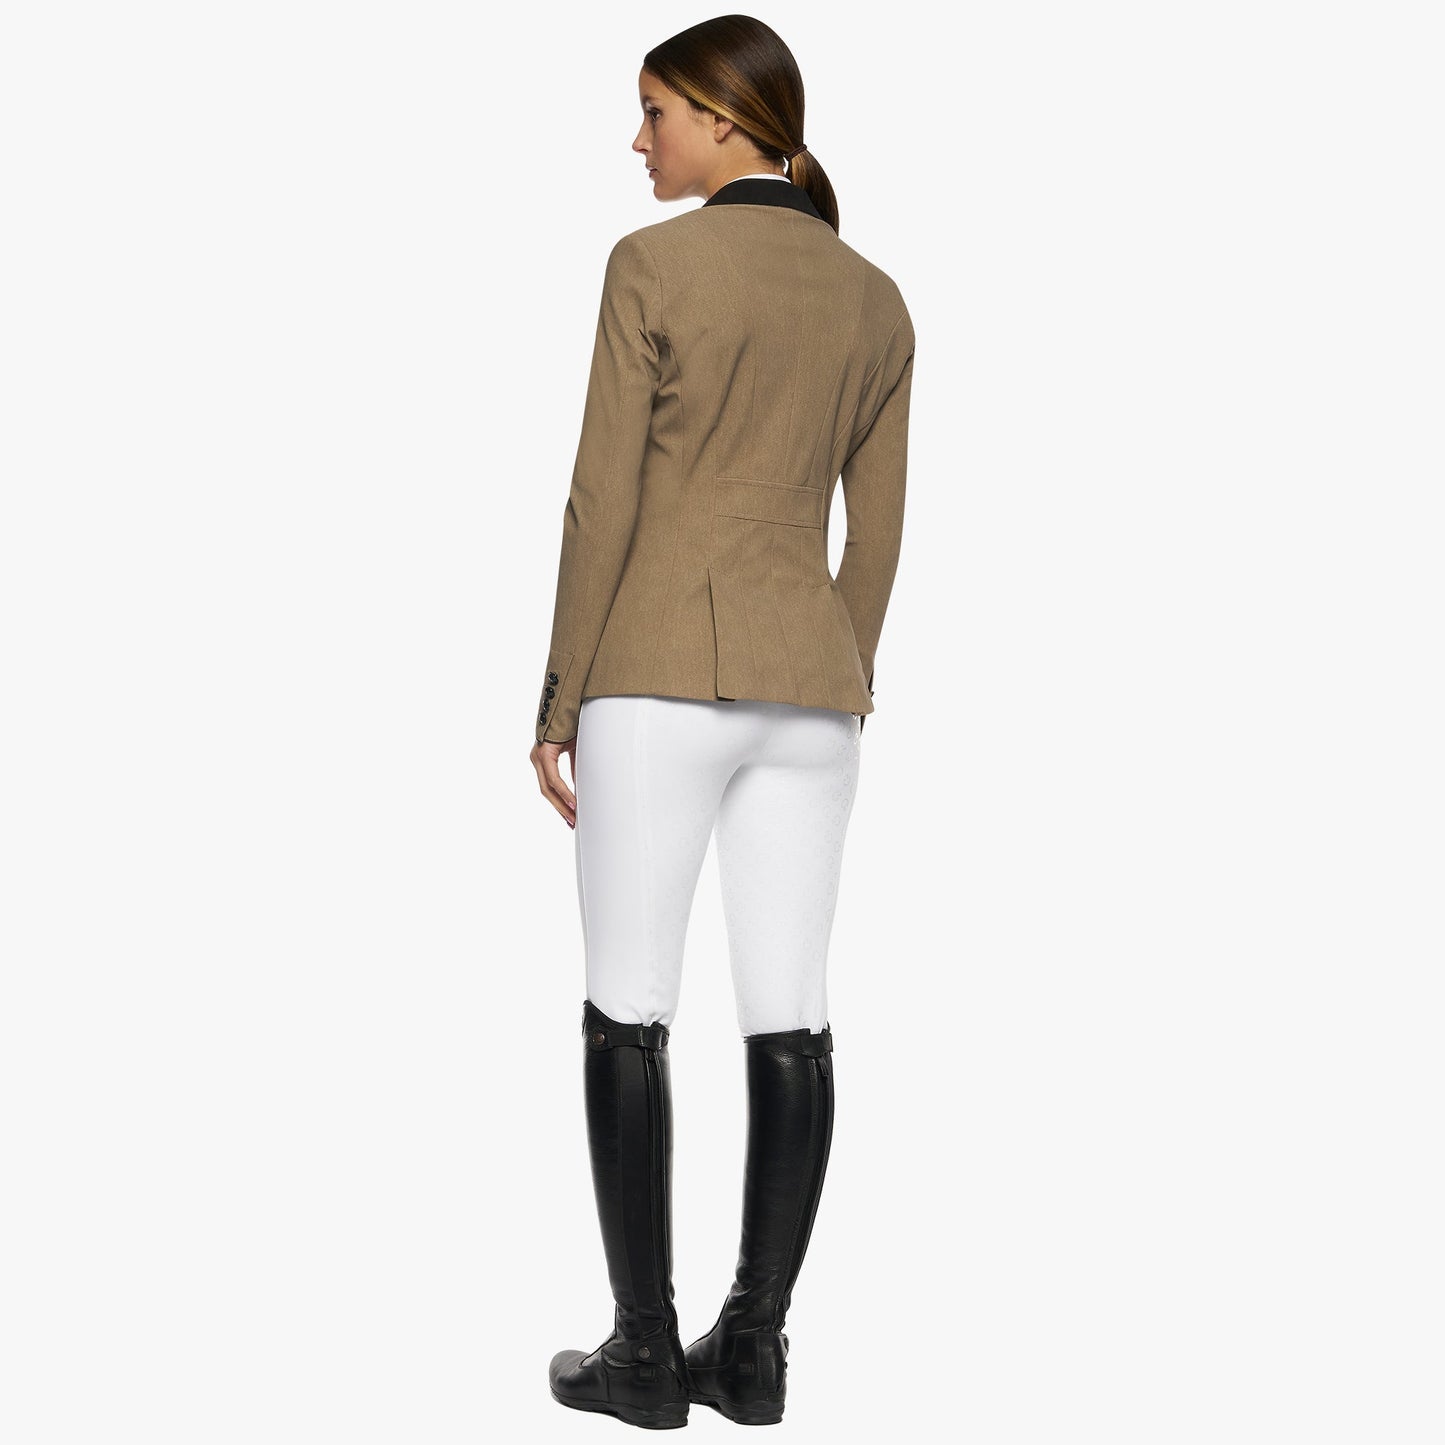 Cavalleria Toscana Ladies GP Riding Jacket - Beige Fantasy-Trailrace Equestrian Outfitters-The Equestrian